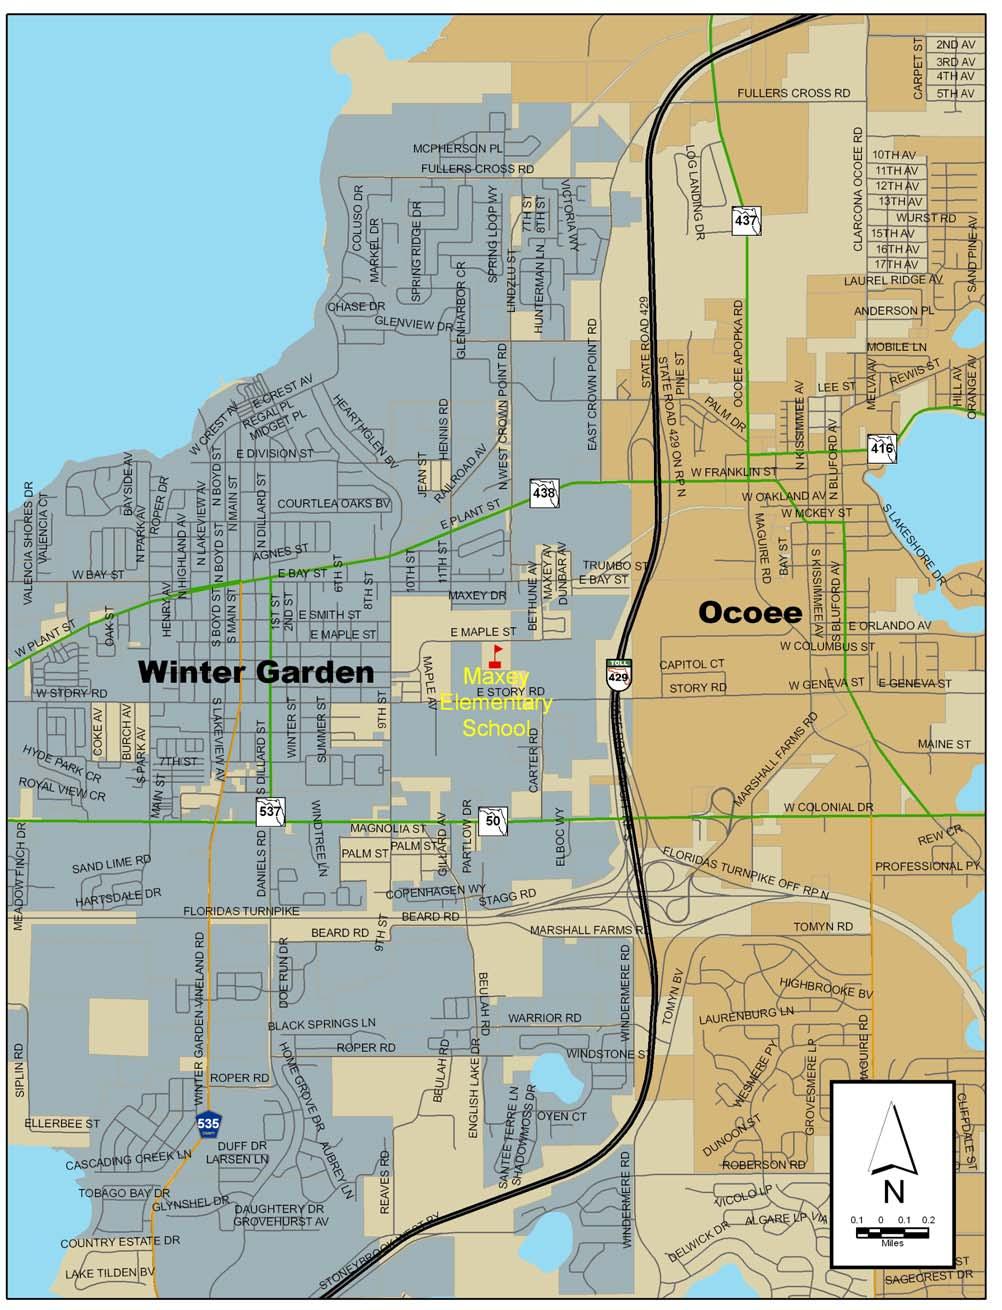 School Route Plan- Maxey Elementary